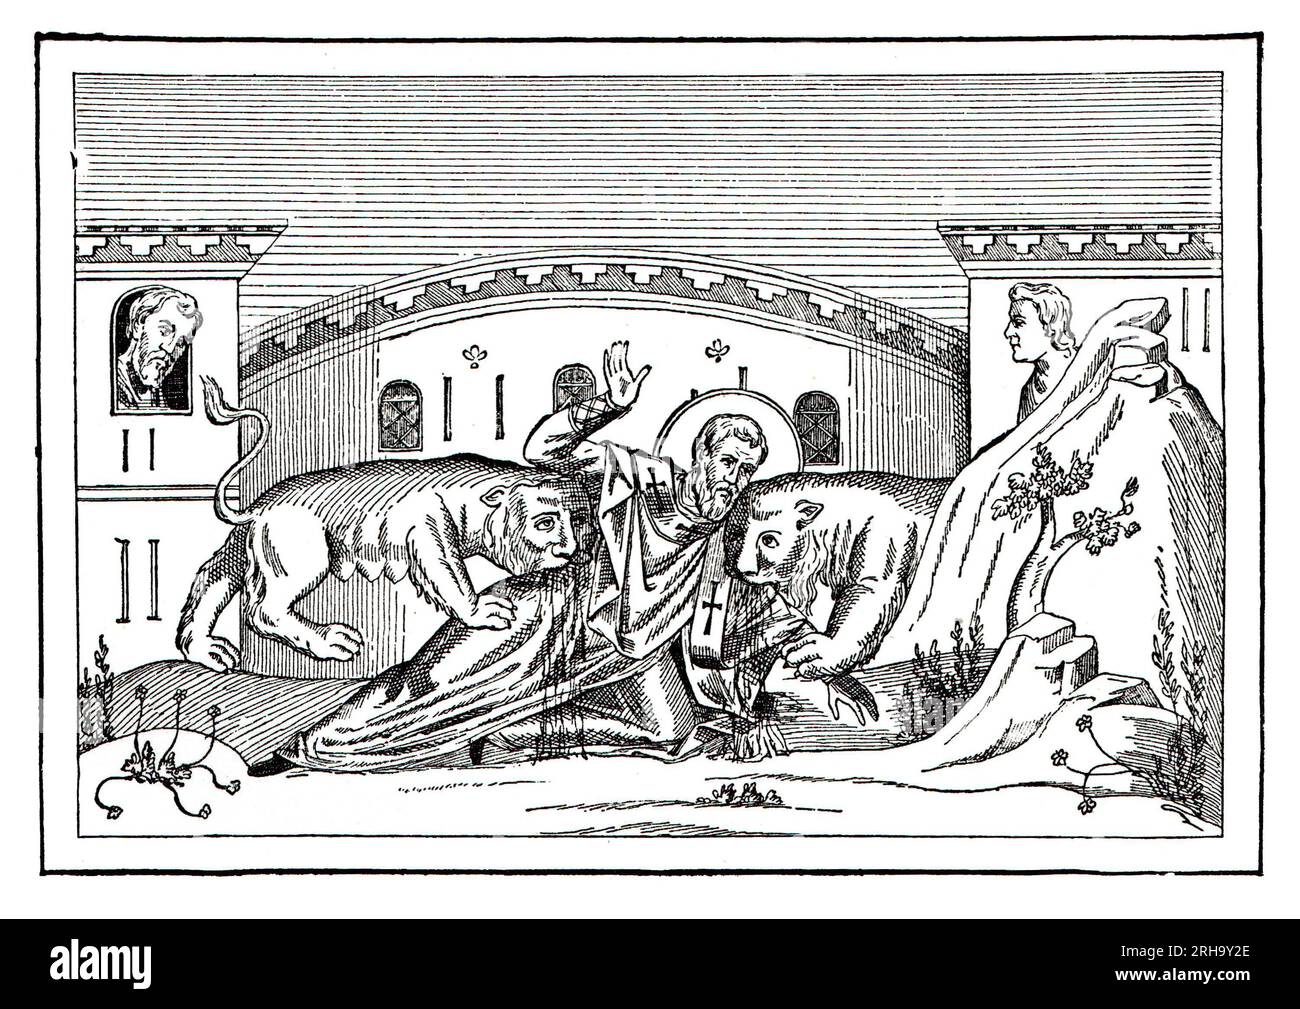 The Martyrdom of Saint Ignatius (thrown to the beasts), which took place at the Colosseum in Rome, according to John Chrysostom's account of St Ignatius's life. Engraving from Lives of the Saints by Sabin Baring-Gould. Stock Photo